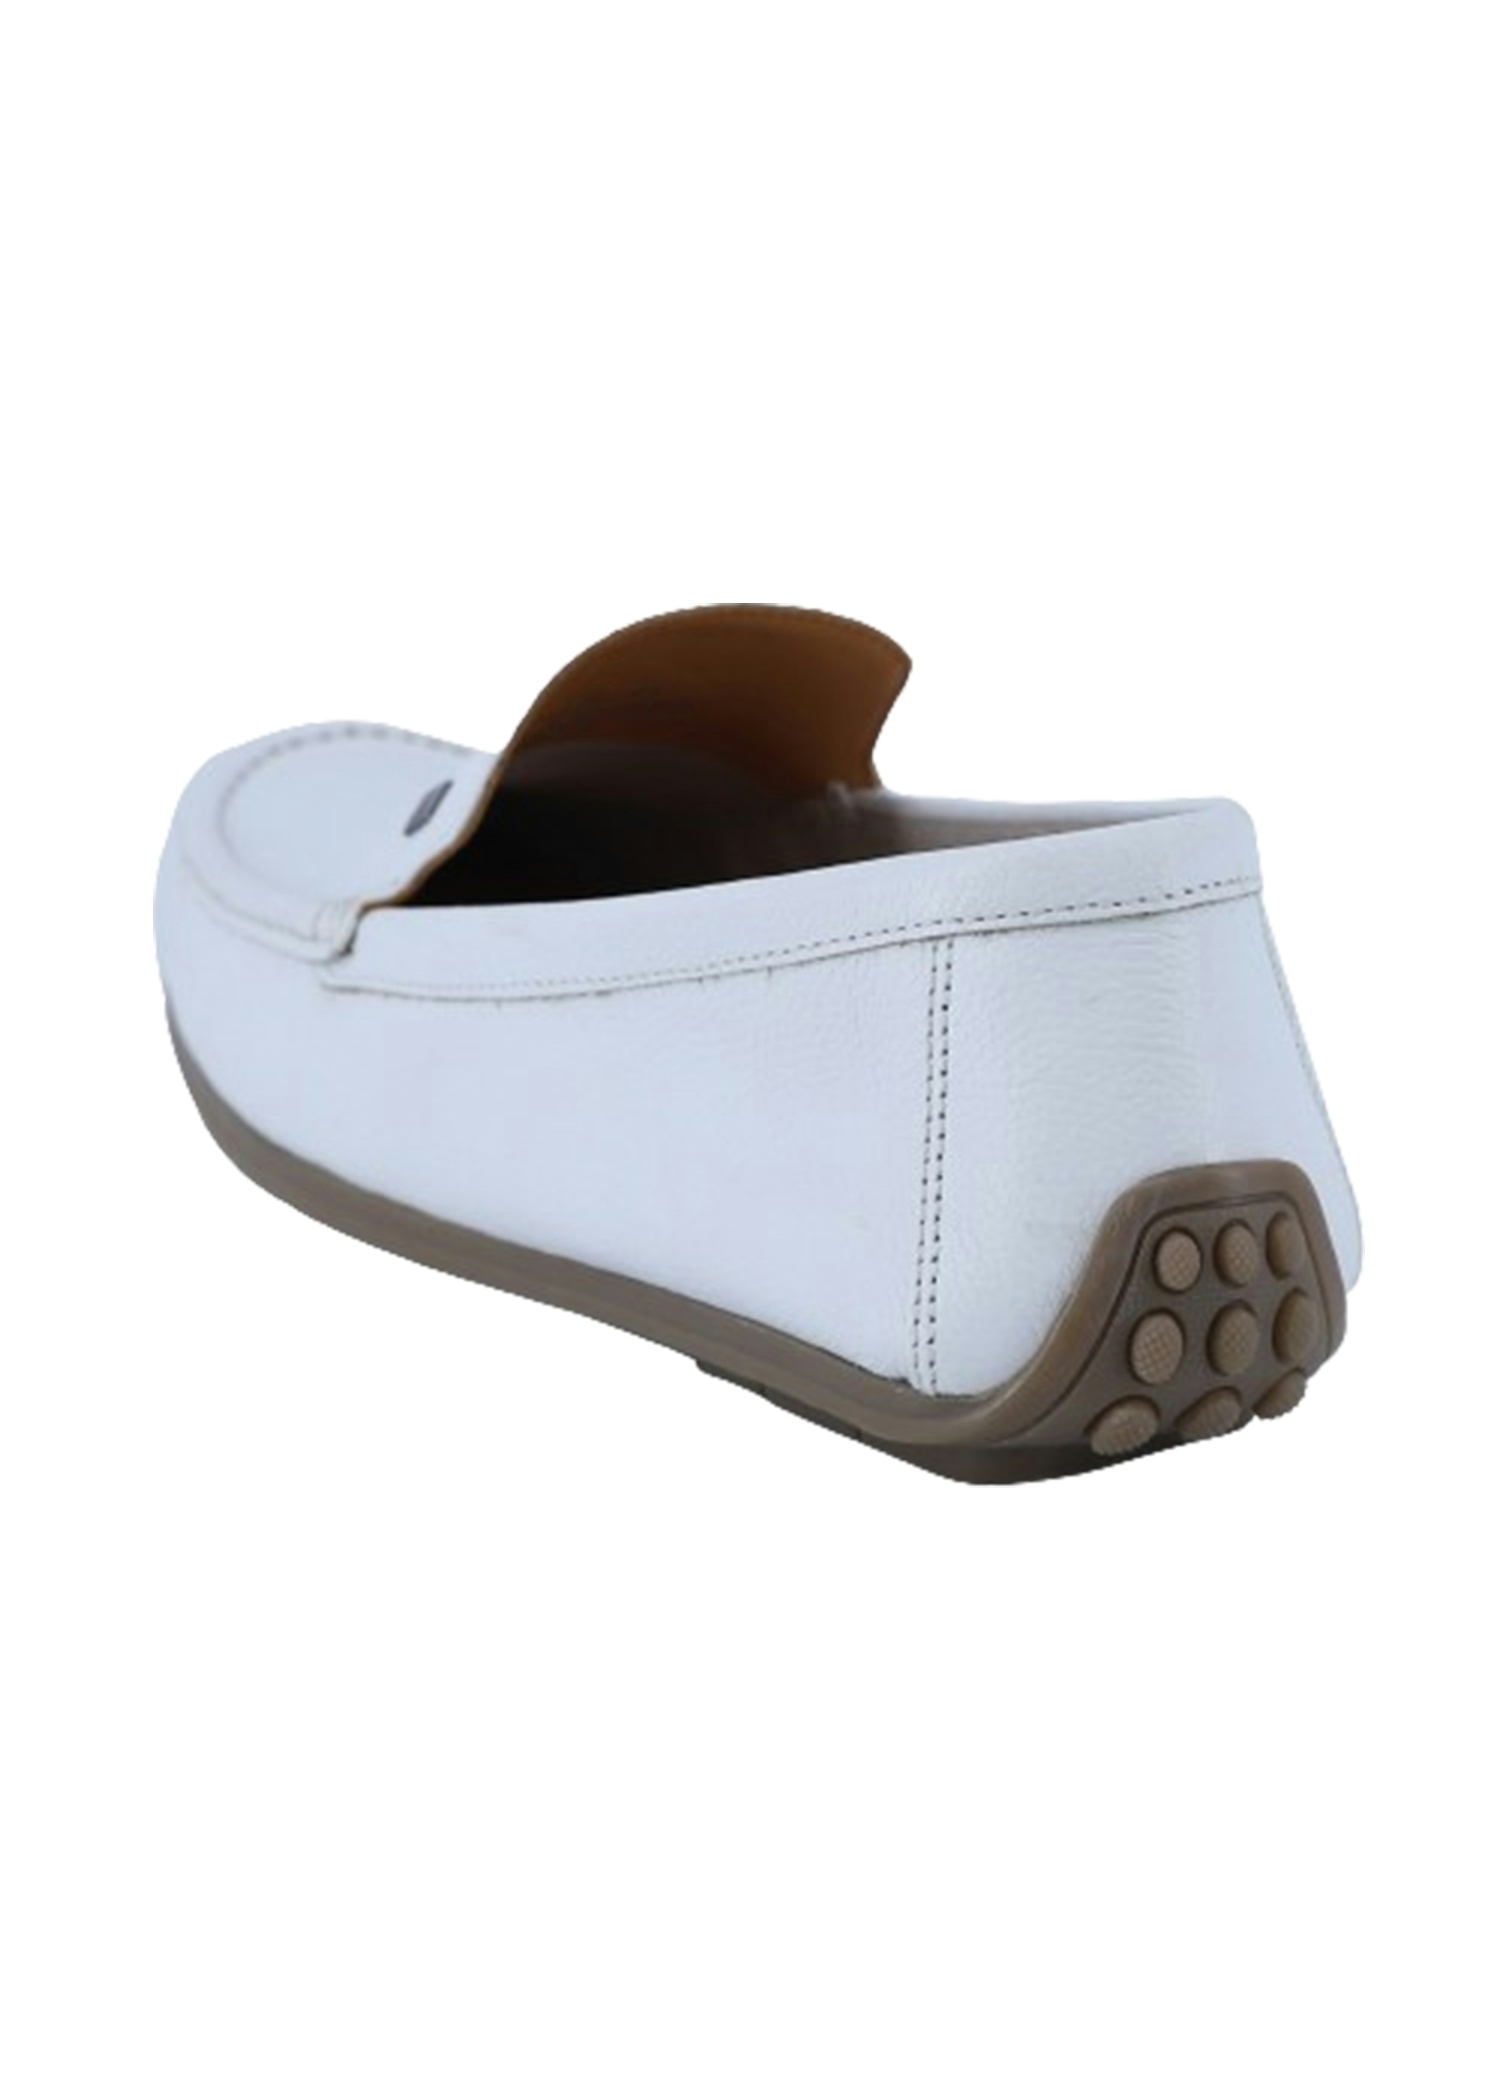 deer mens shoes white color back view